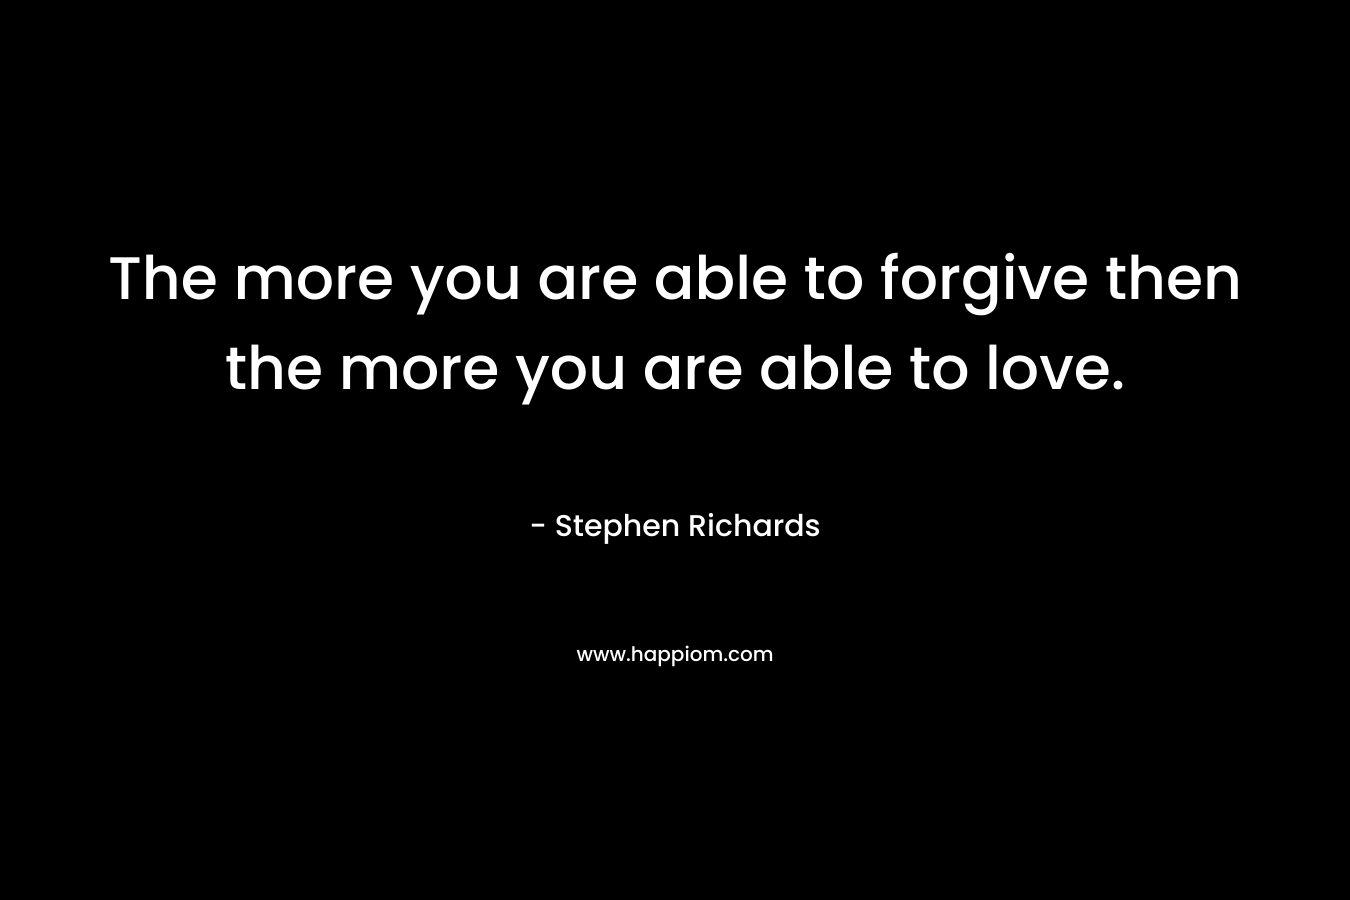 The more you are able to forgive then the more you are able to love.